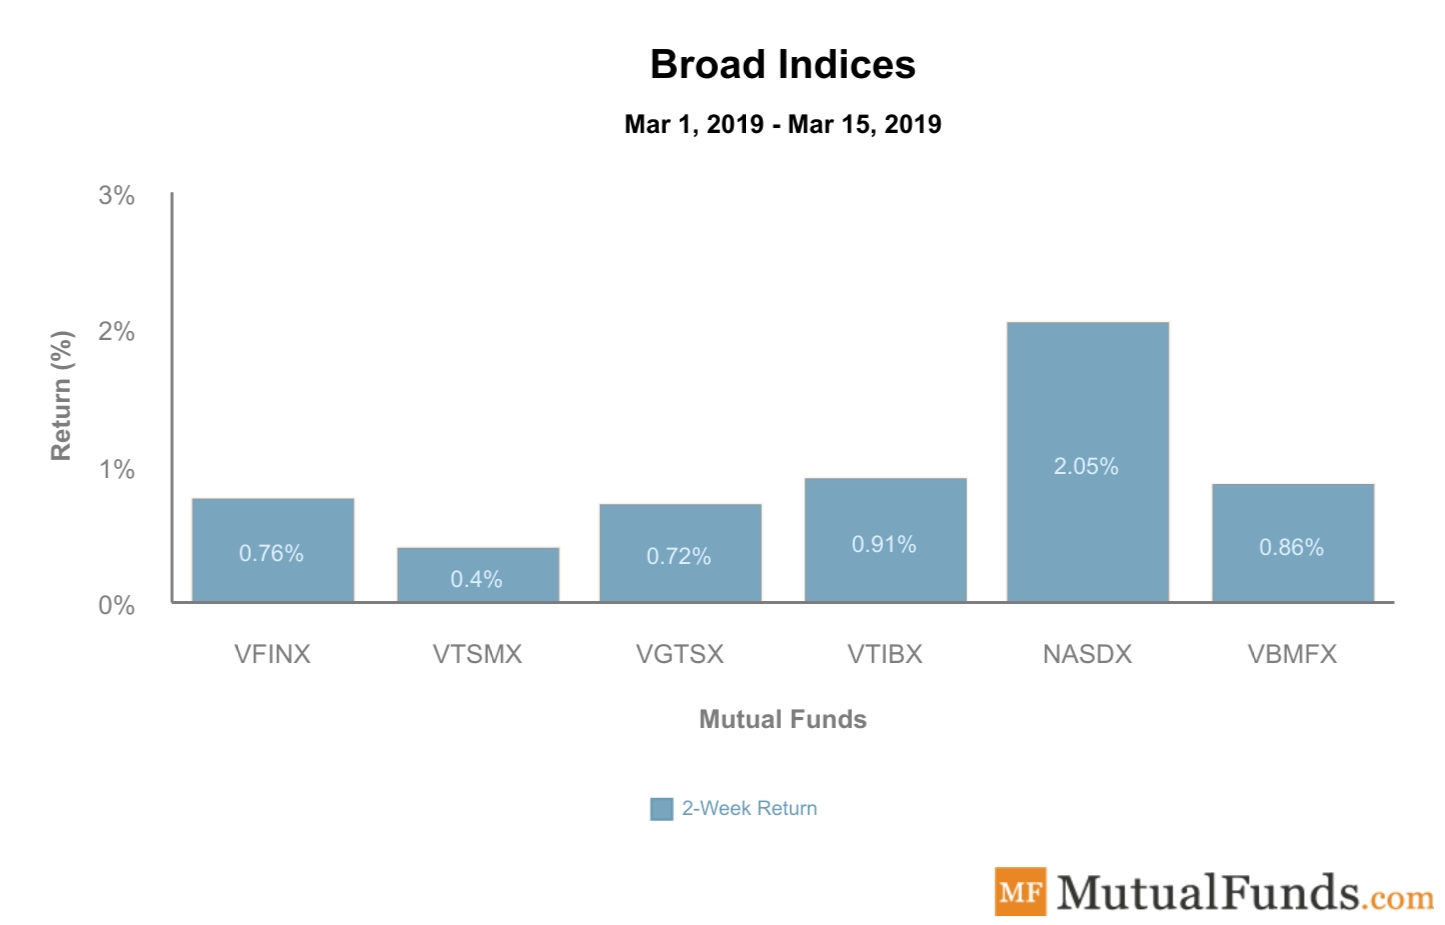 Broad Indices Performance